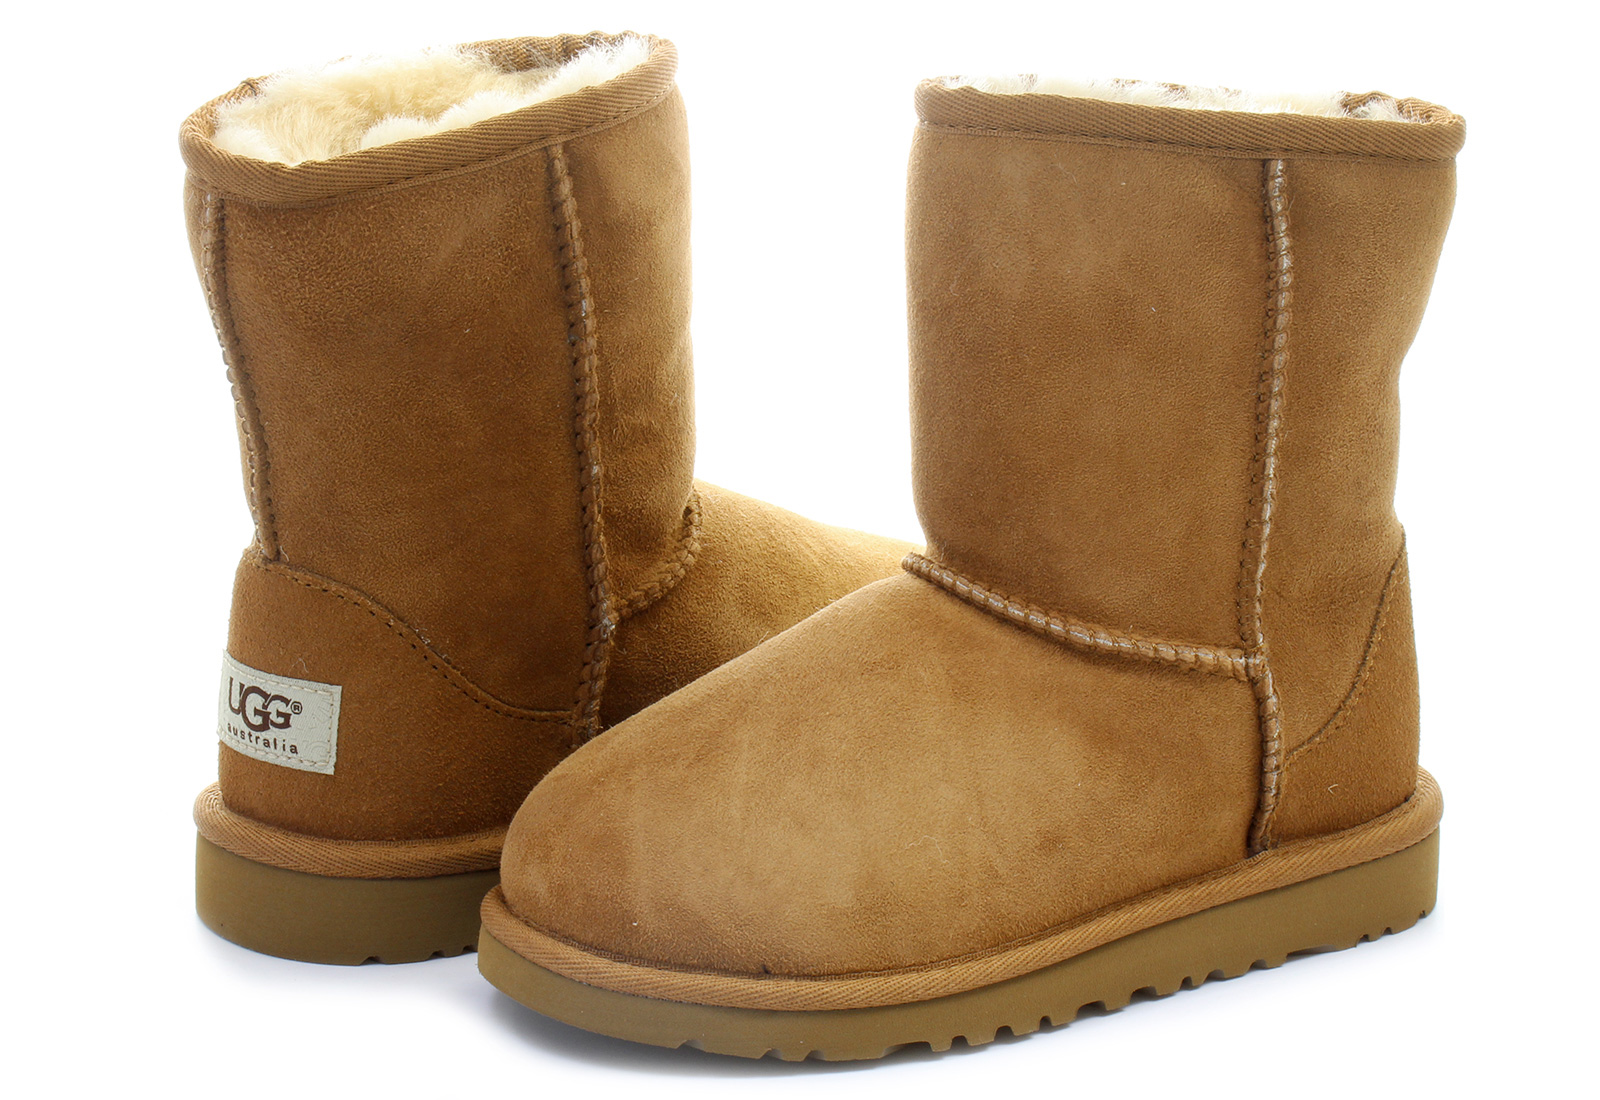 best price ugg boots uk Limit discounts 